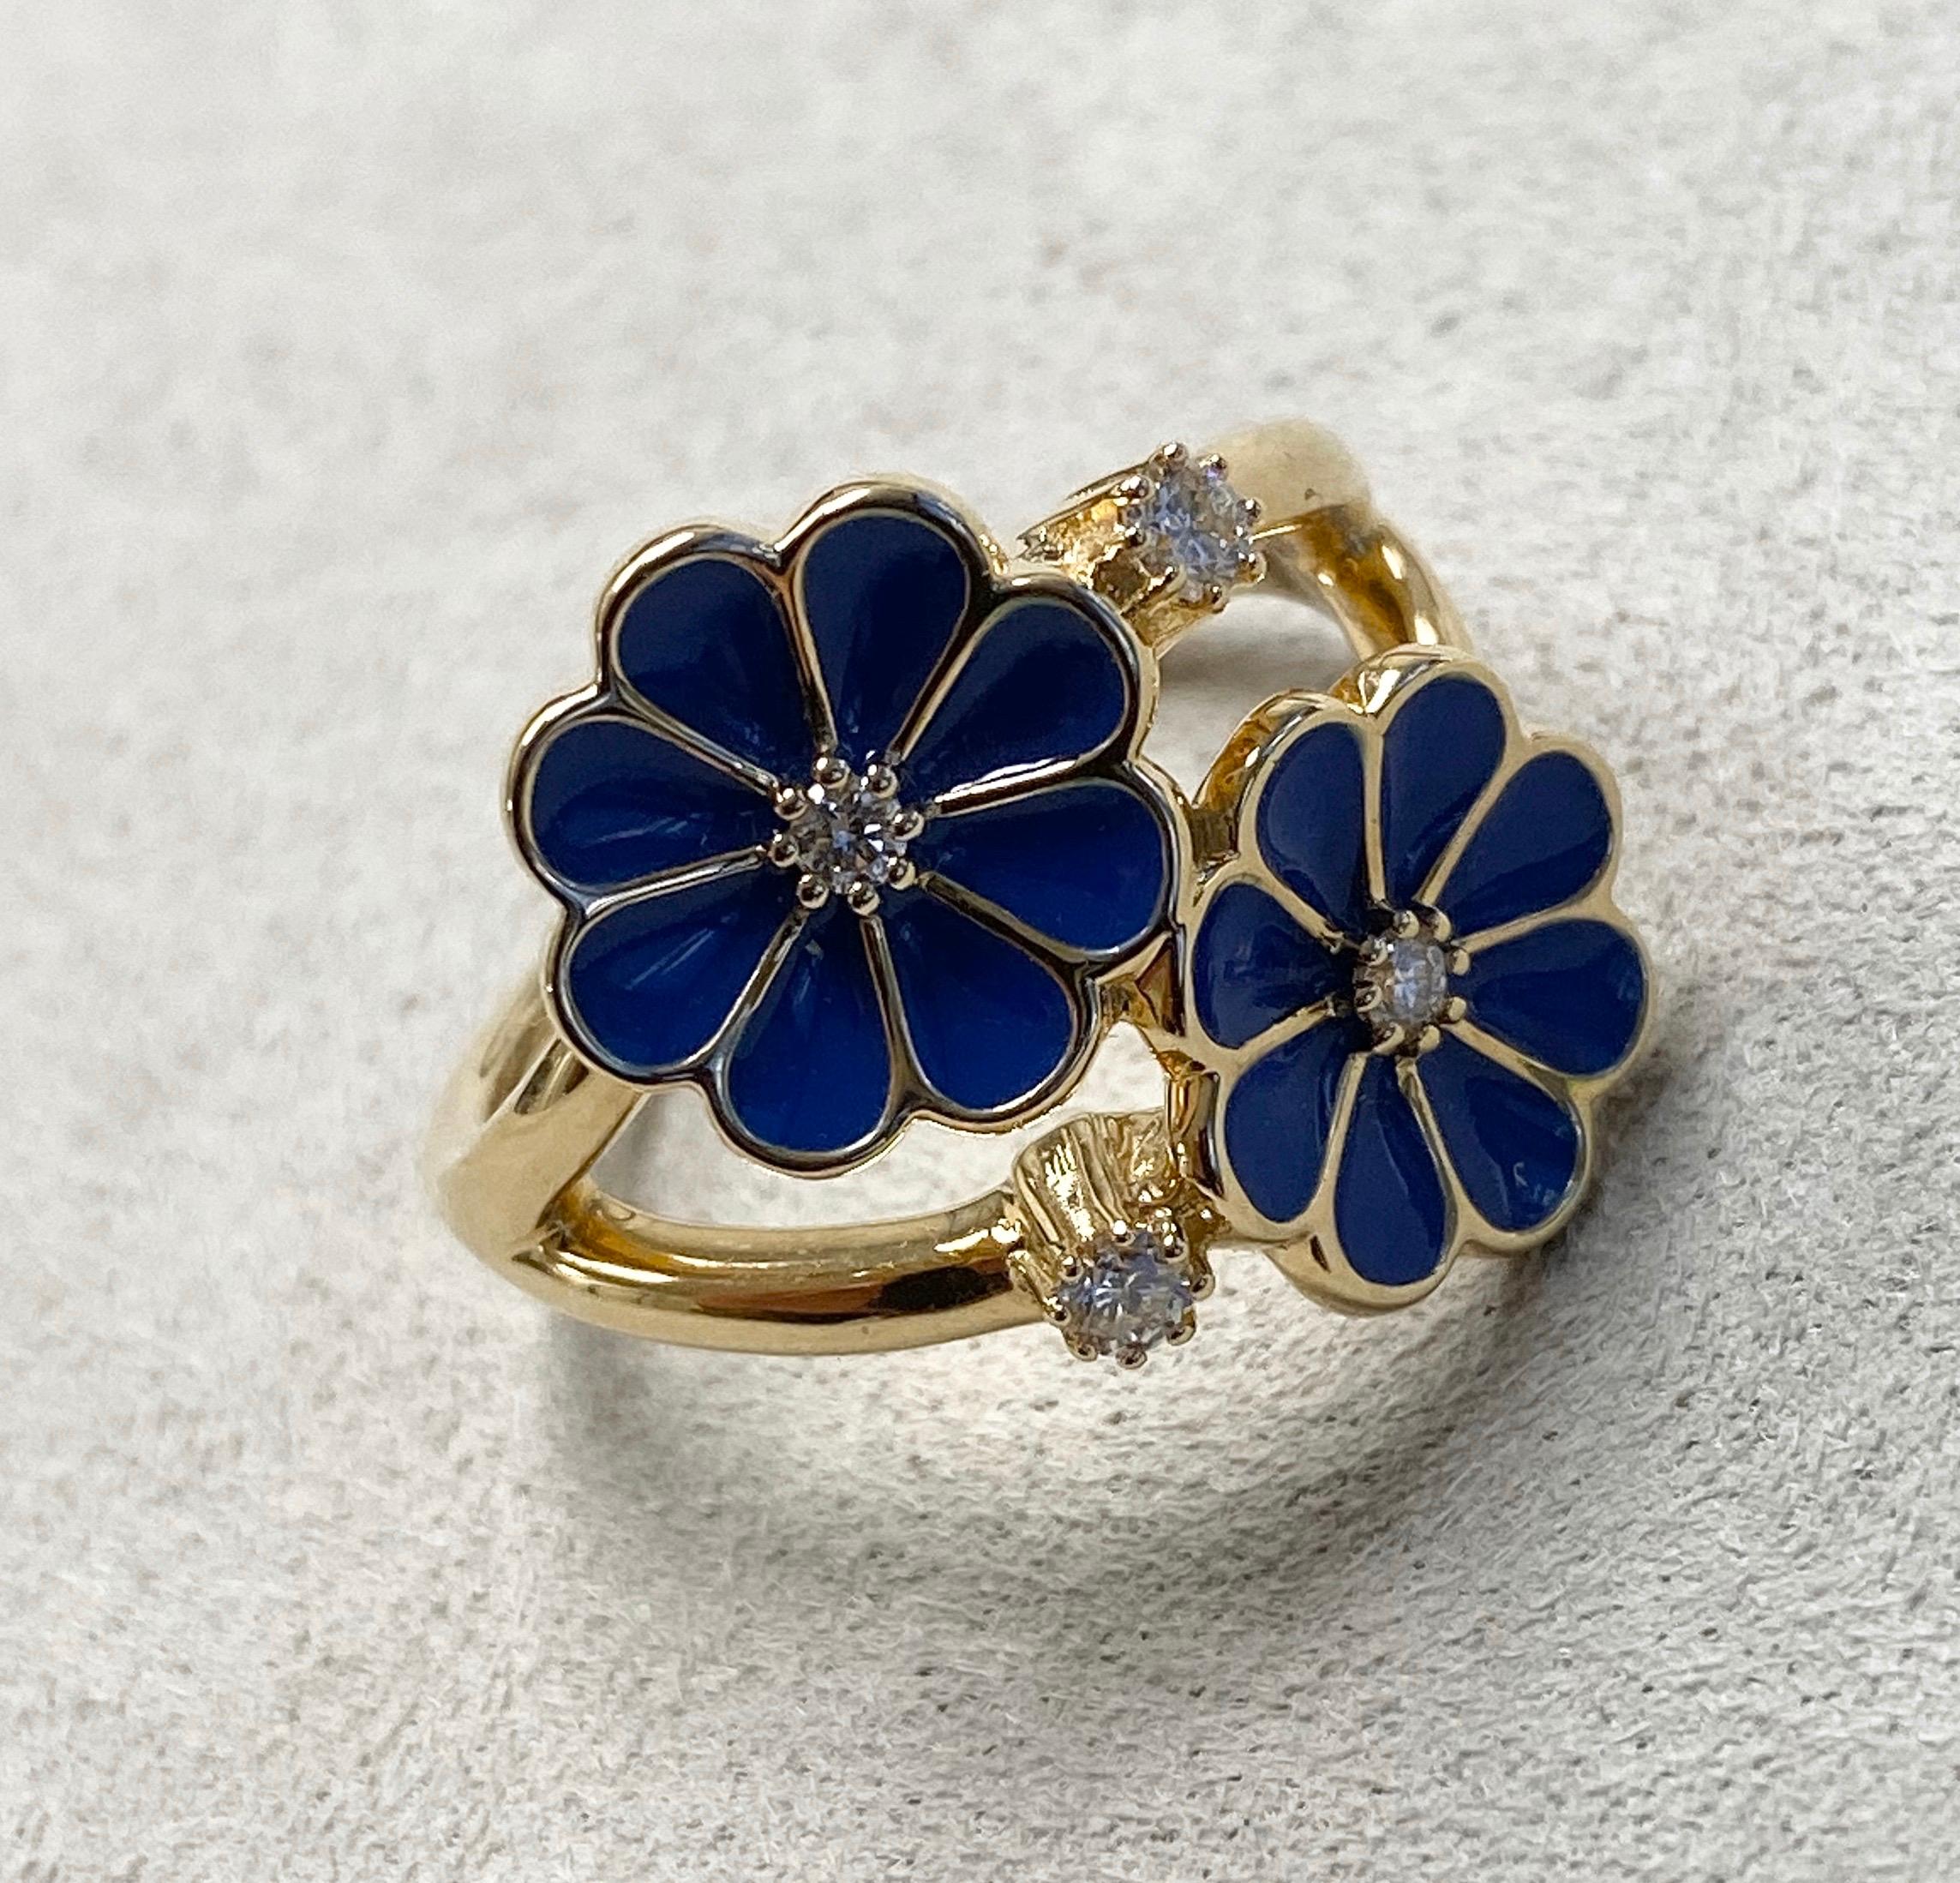 Created in 18 karat yellow gold
Dark Blue enamel 
Champagne diamonds 0.14 ct approx
Ring size US 6.5, Can be made in other ring sizes on special order


About the Designers ~ Dharmesh & Namrata

Drawing inspiration from little things, Dharmesh &